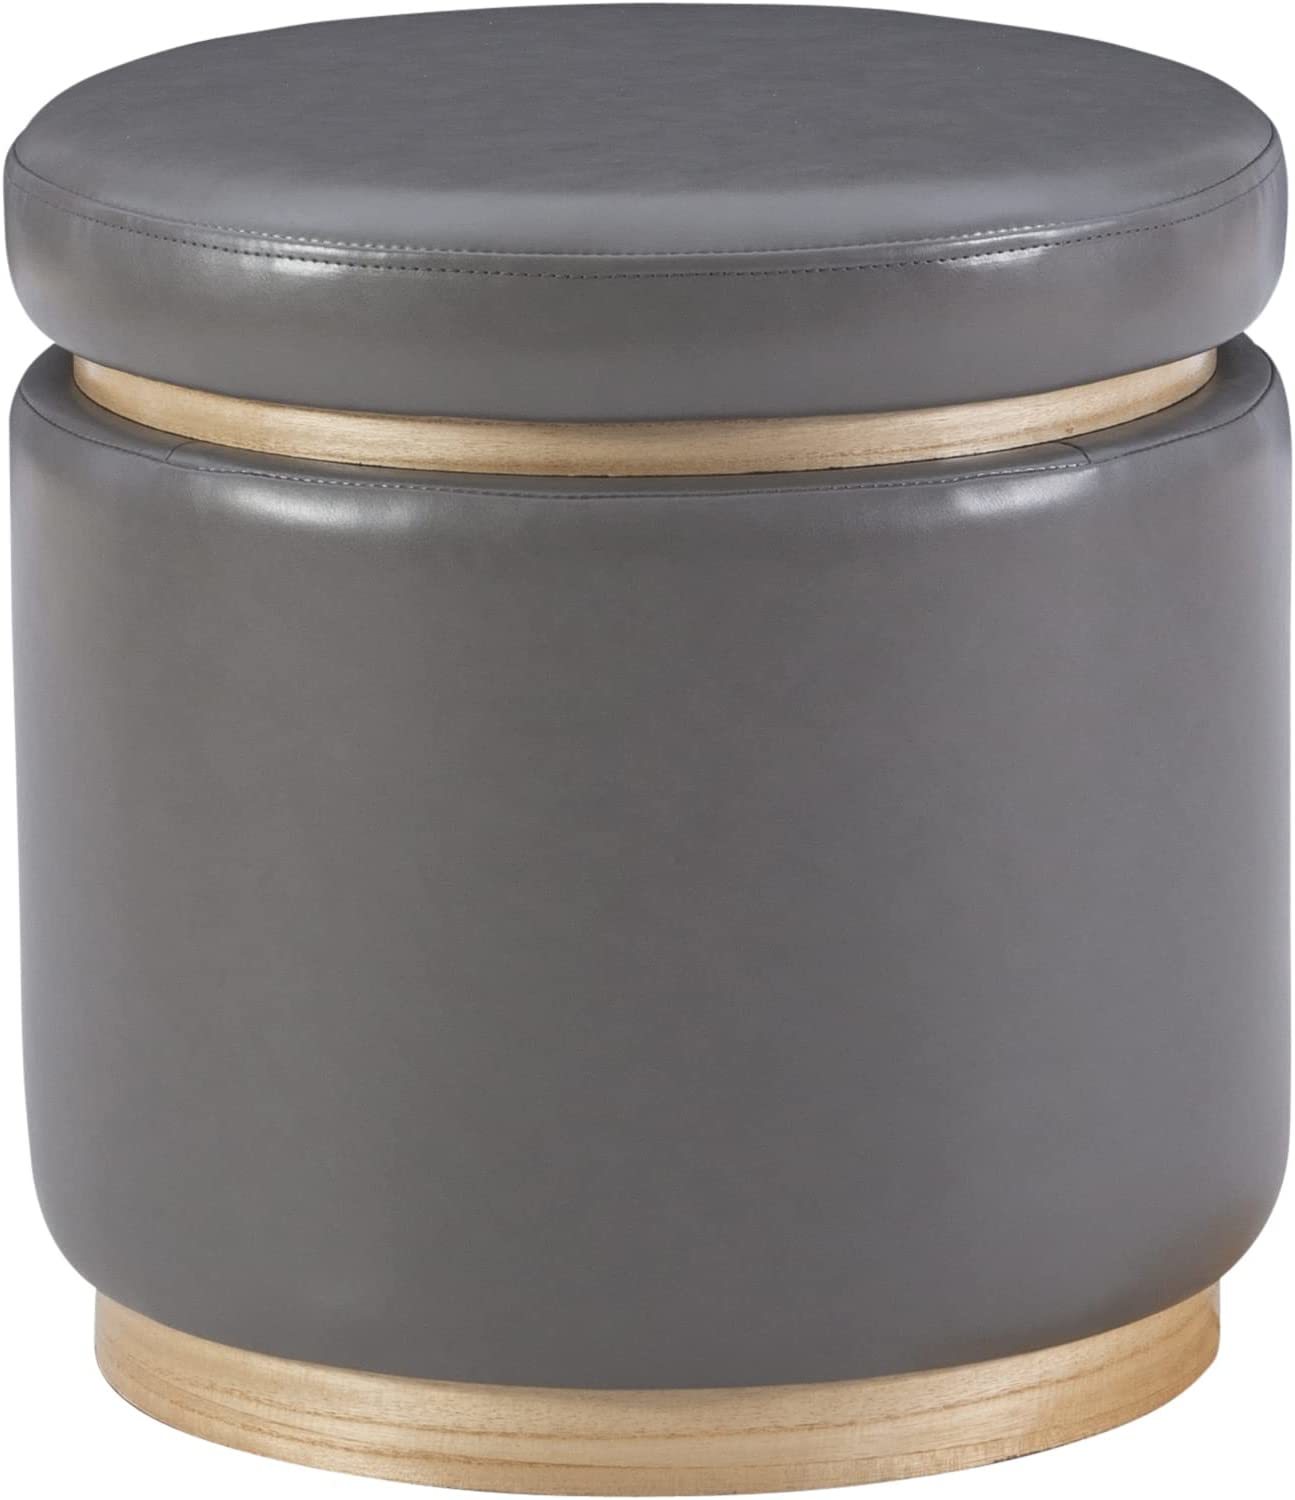 Lexington Grey Faux Leather Round Storage Ottoman with Wood Accent by Linon - $82.99